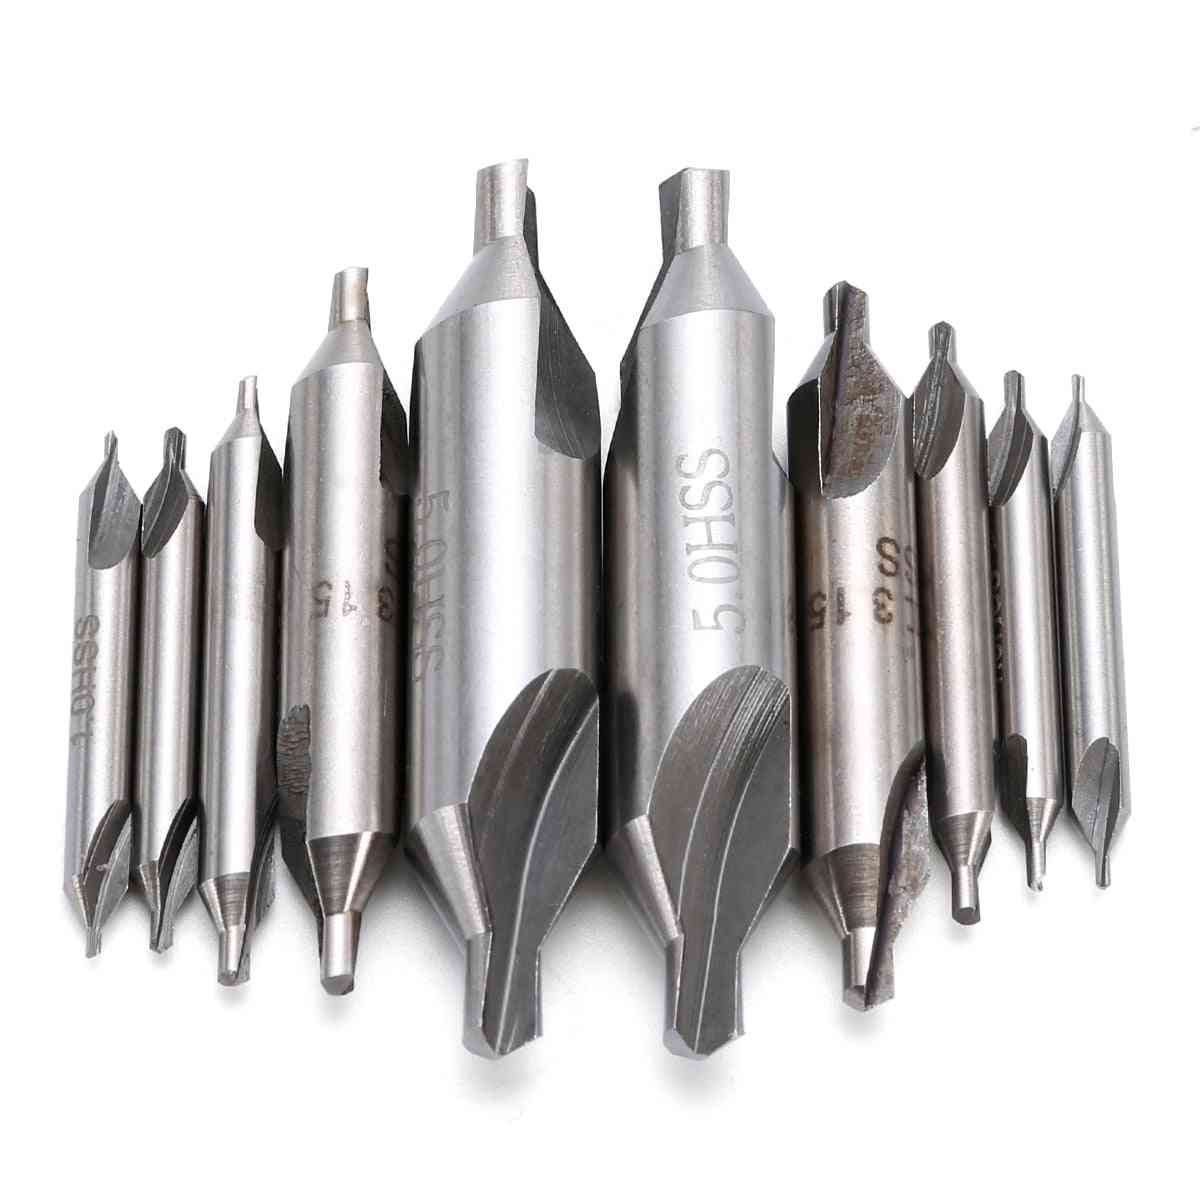 10pcs High Speed Steel Center Drills Combined Countersink Bits